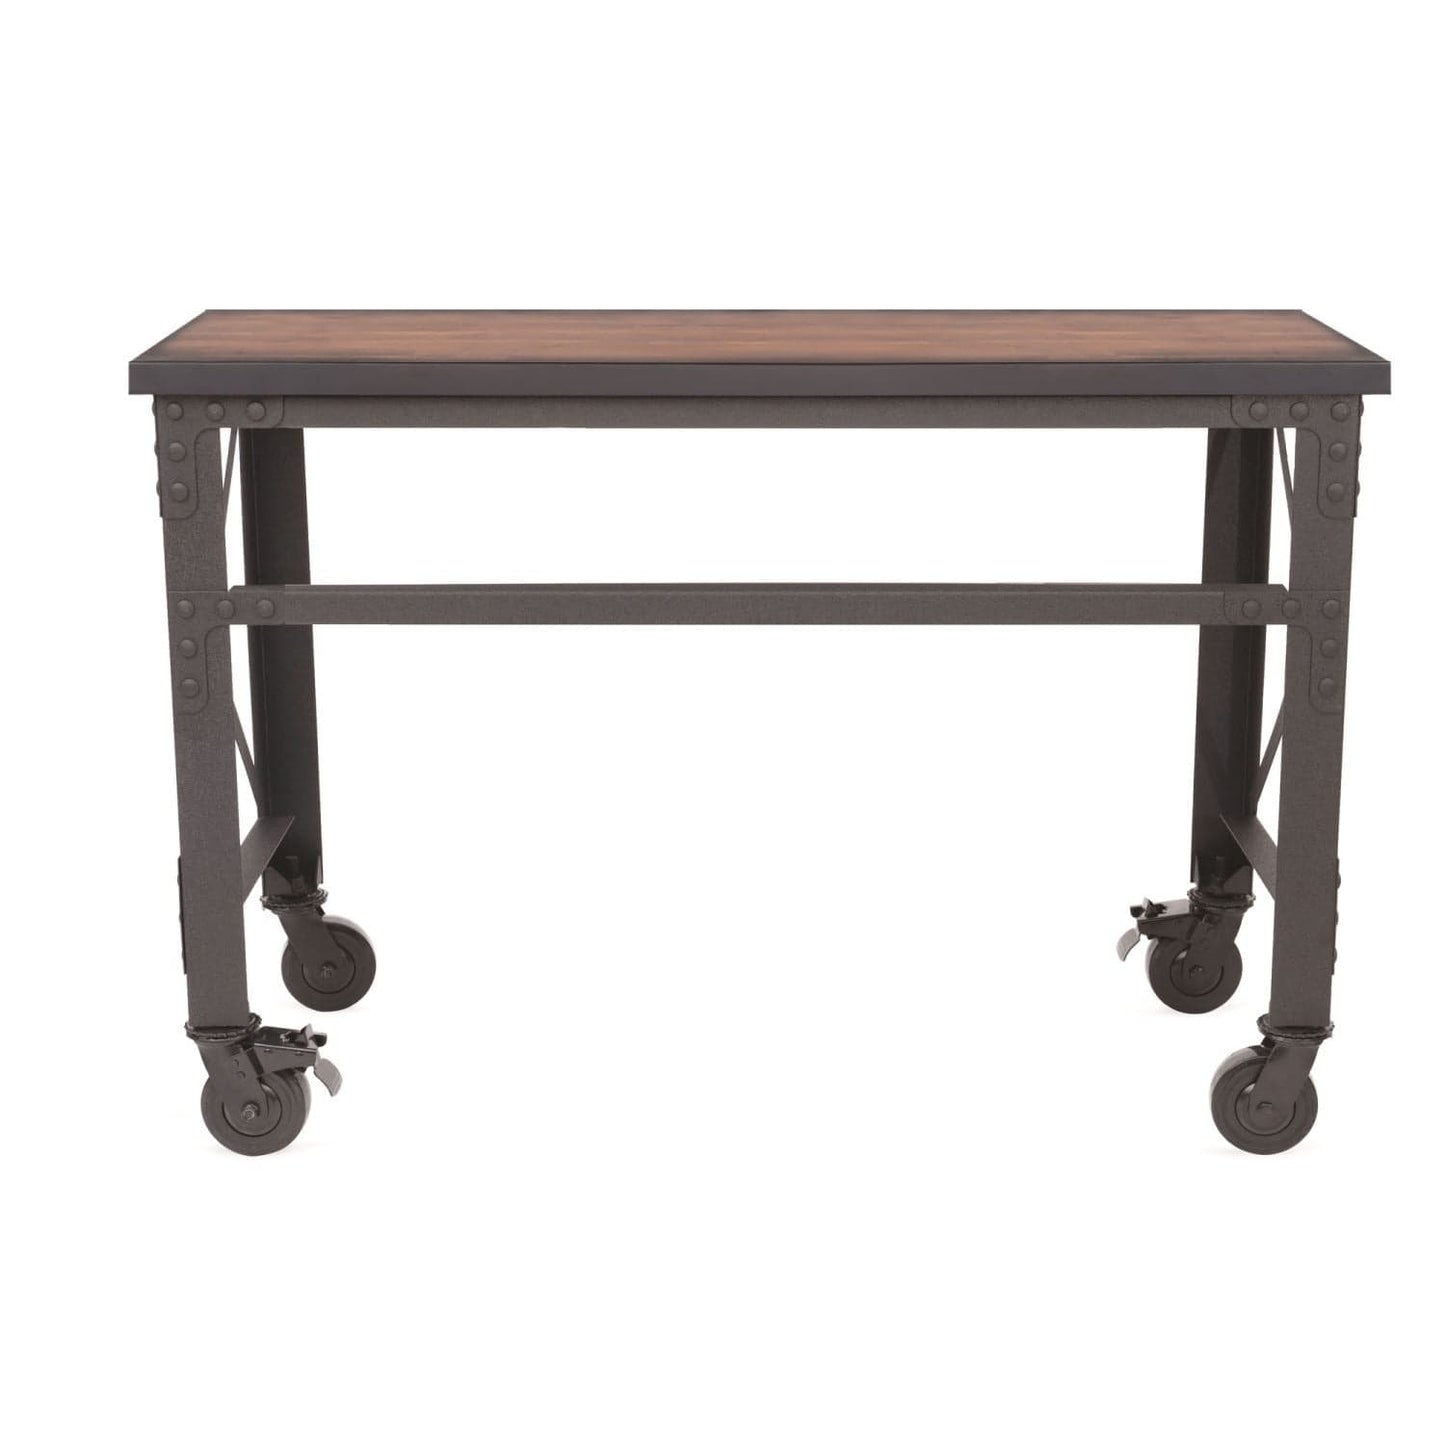 Duramax Furnitures DuraMax | 52 In. x 24 In. Rolling Industrial Worktable Desk with Solid Wood Top 68022